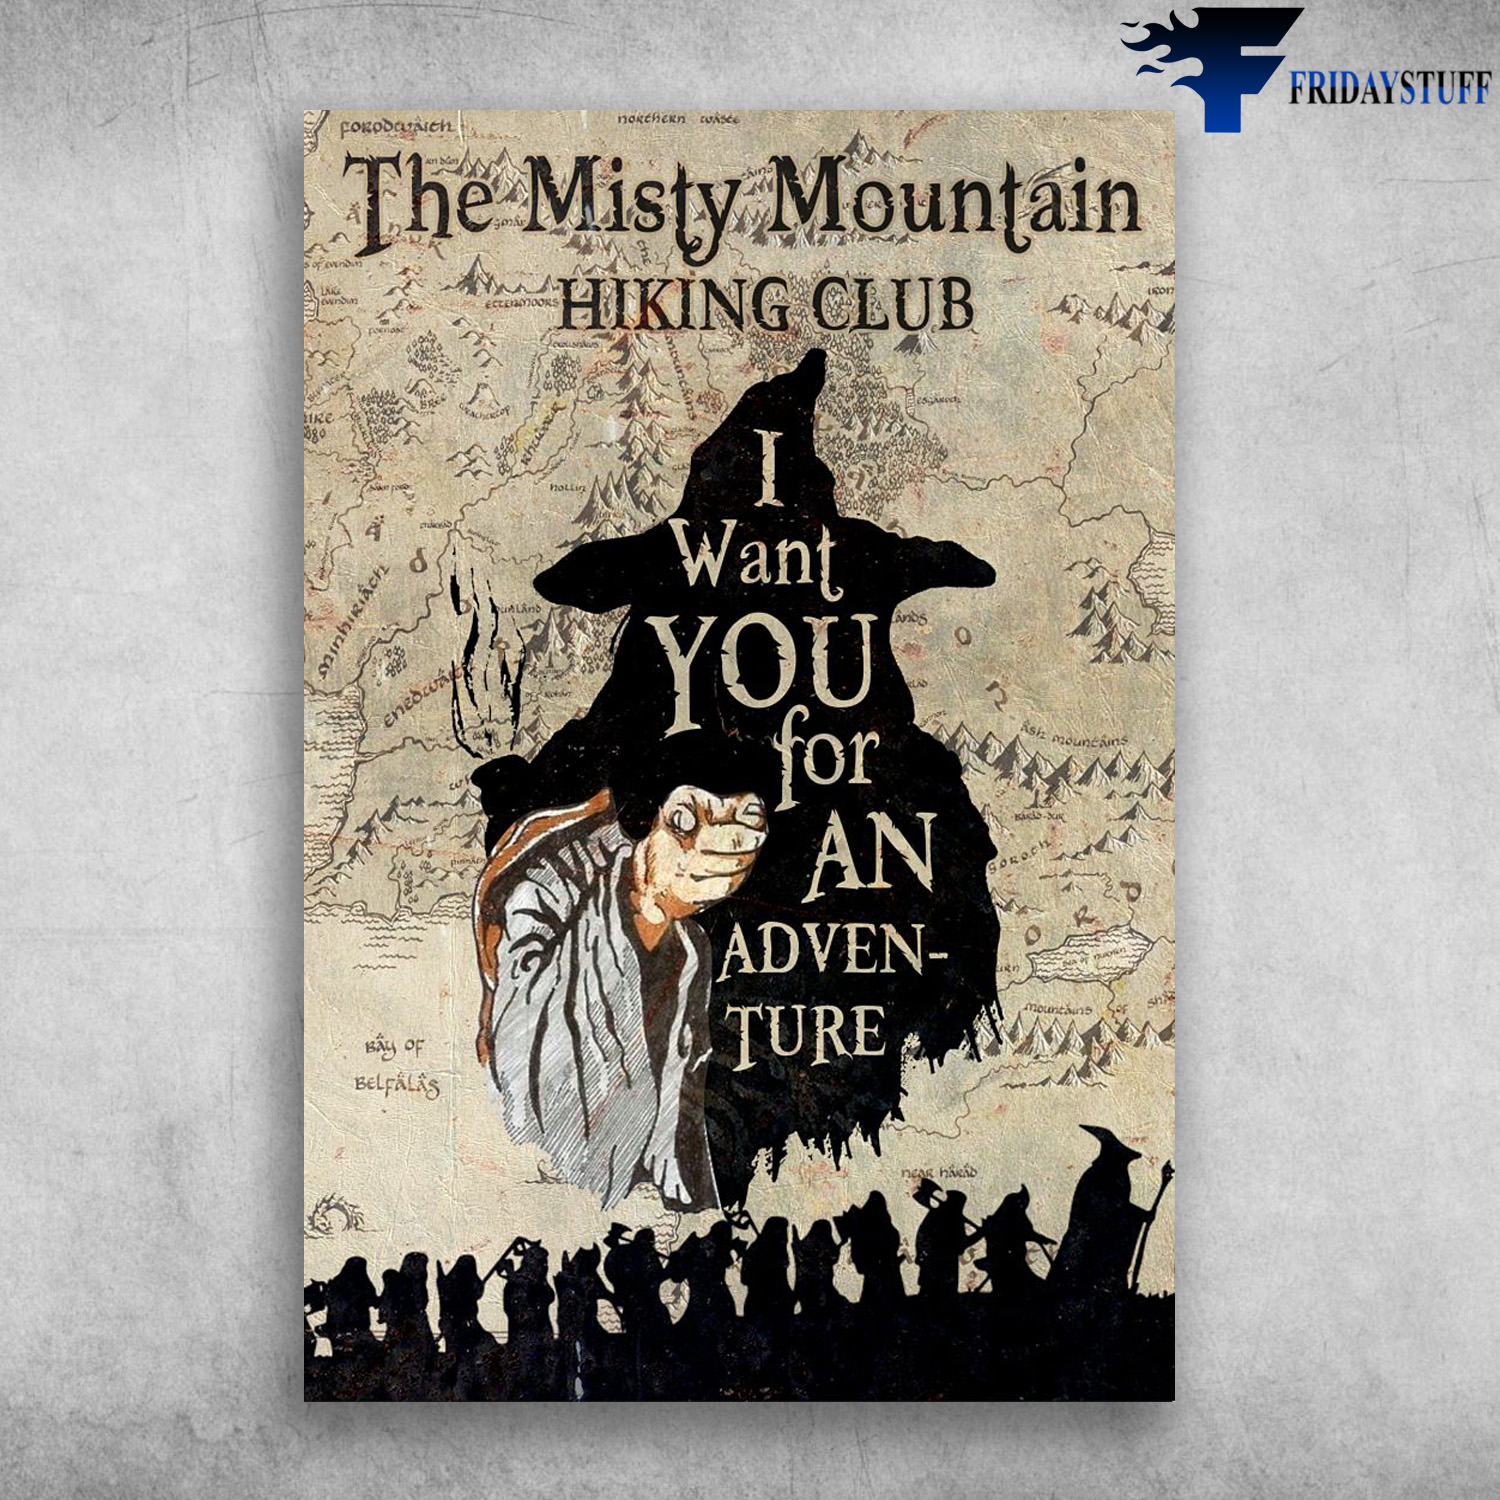 The Misty Mountain - Hiking Club, I Want You For An Adven-Ture